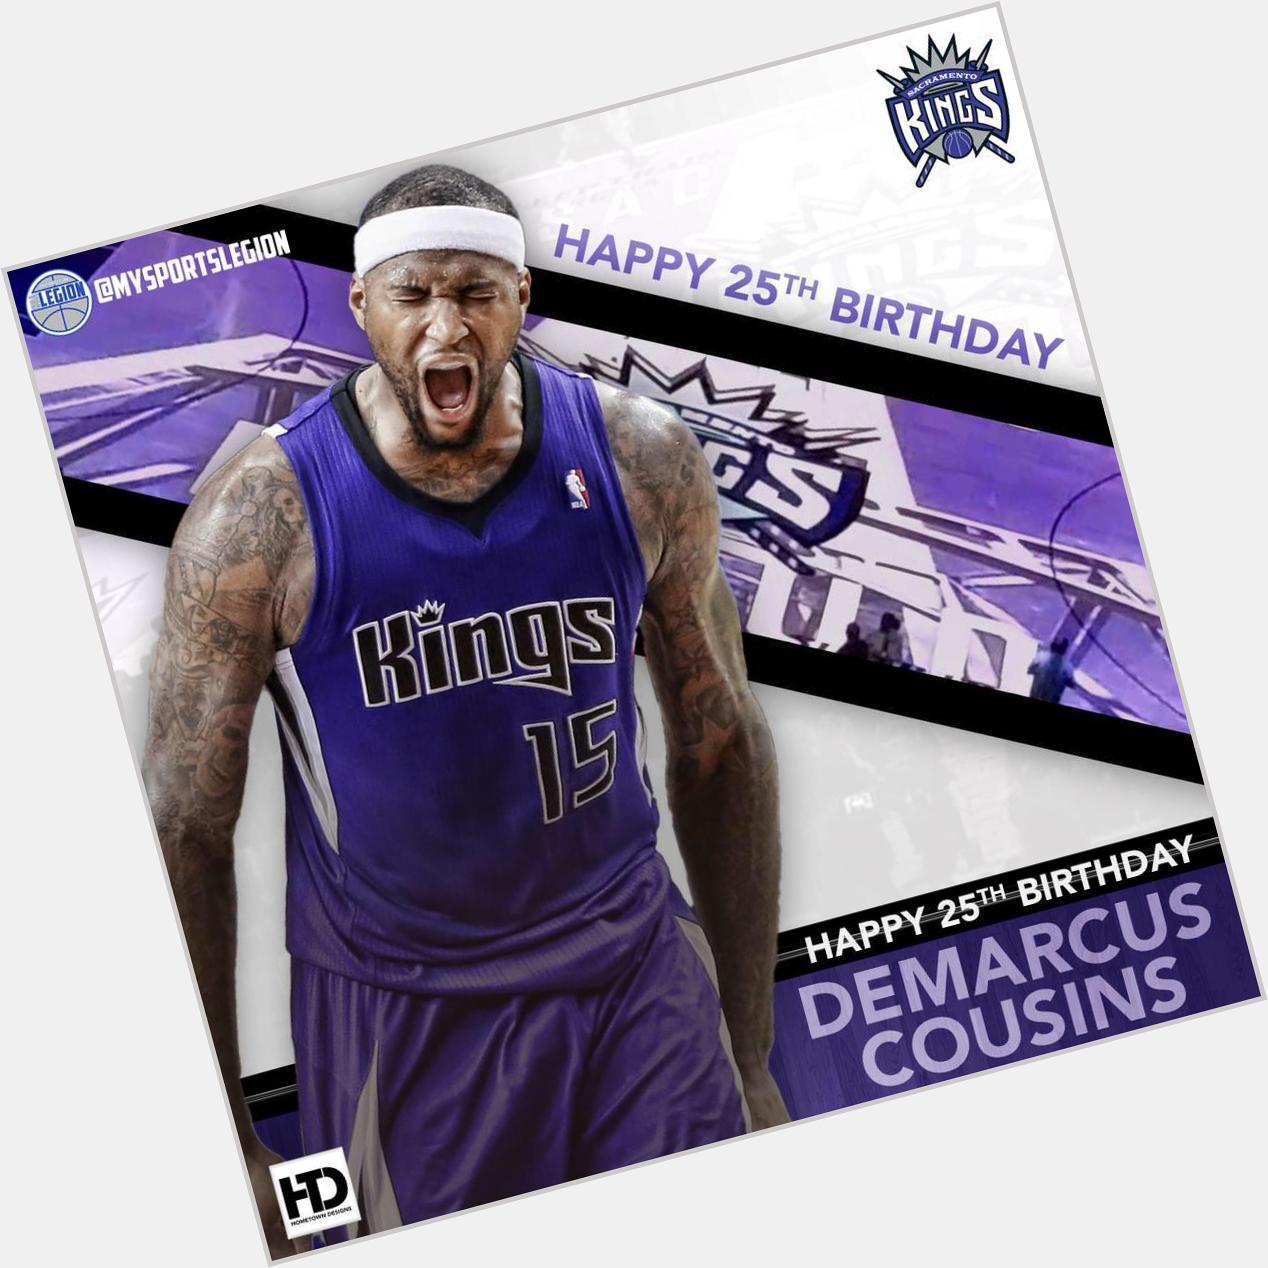 Boogie! Happy 25th birthday to Kings star DeMarcus Cousins! 